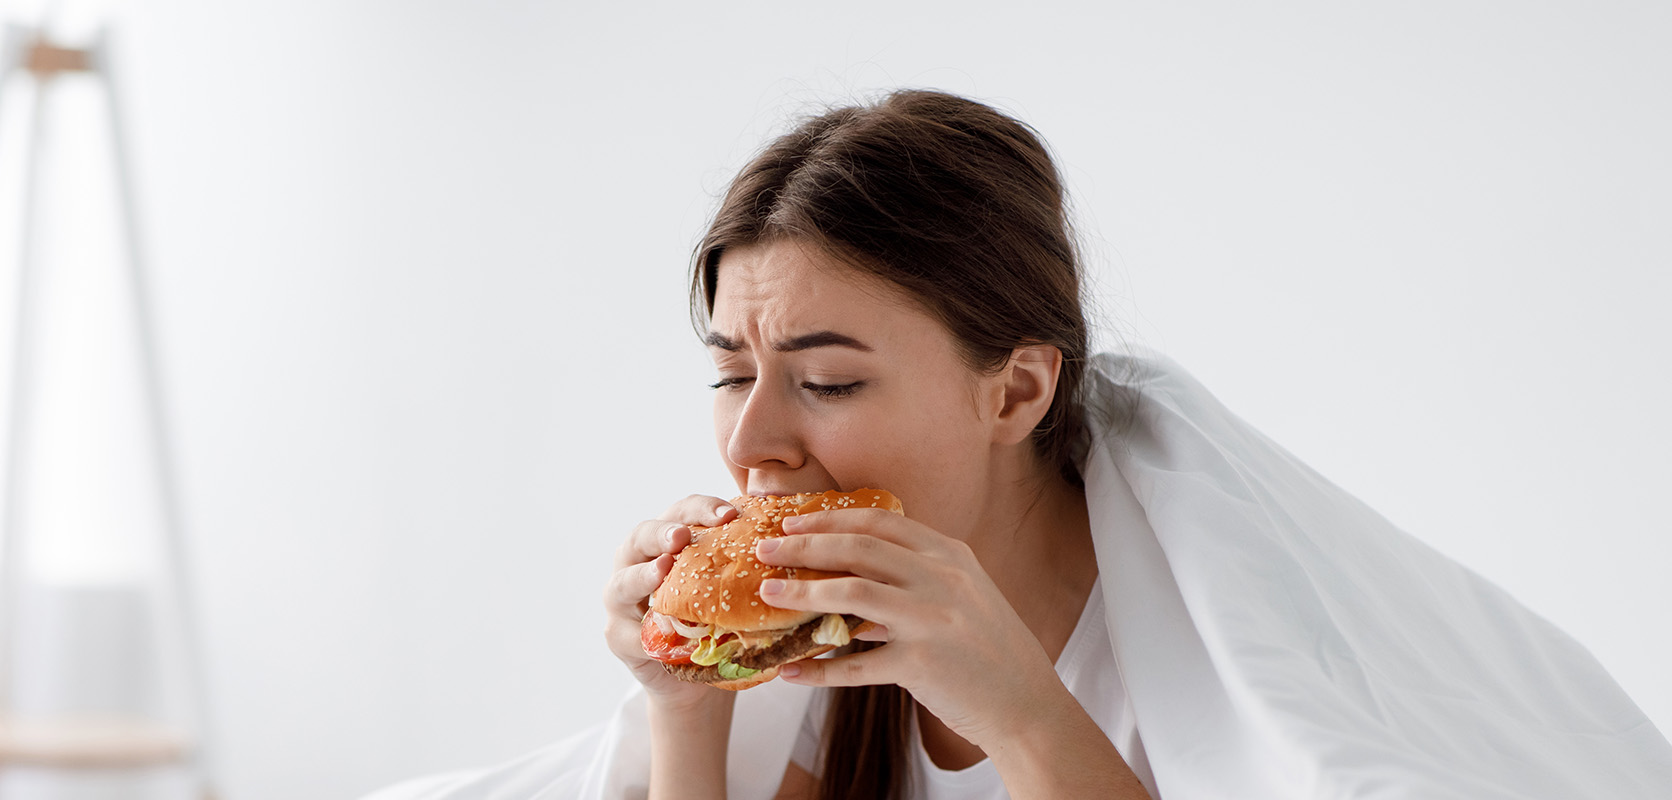 Woman eating a burger at home. buy online weeds. best online dispensary canada. mail order marijuana.